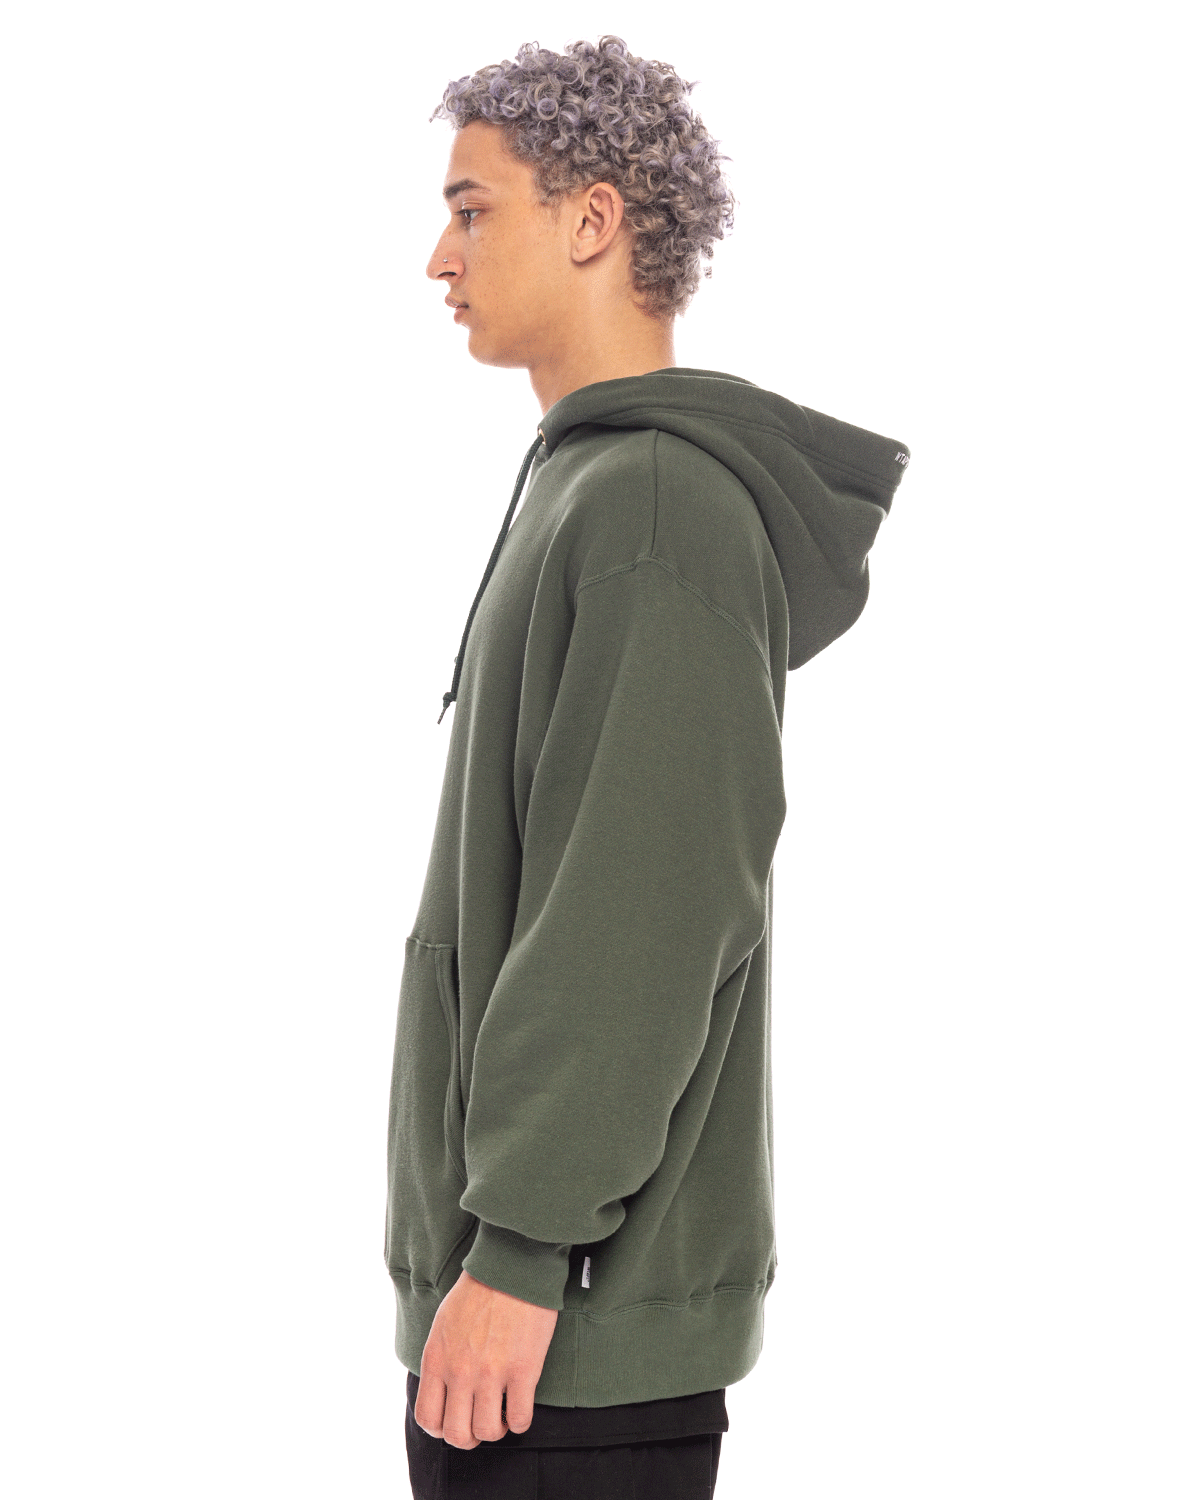 All 01 / Hoody / Cotton